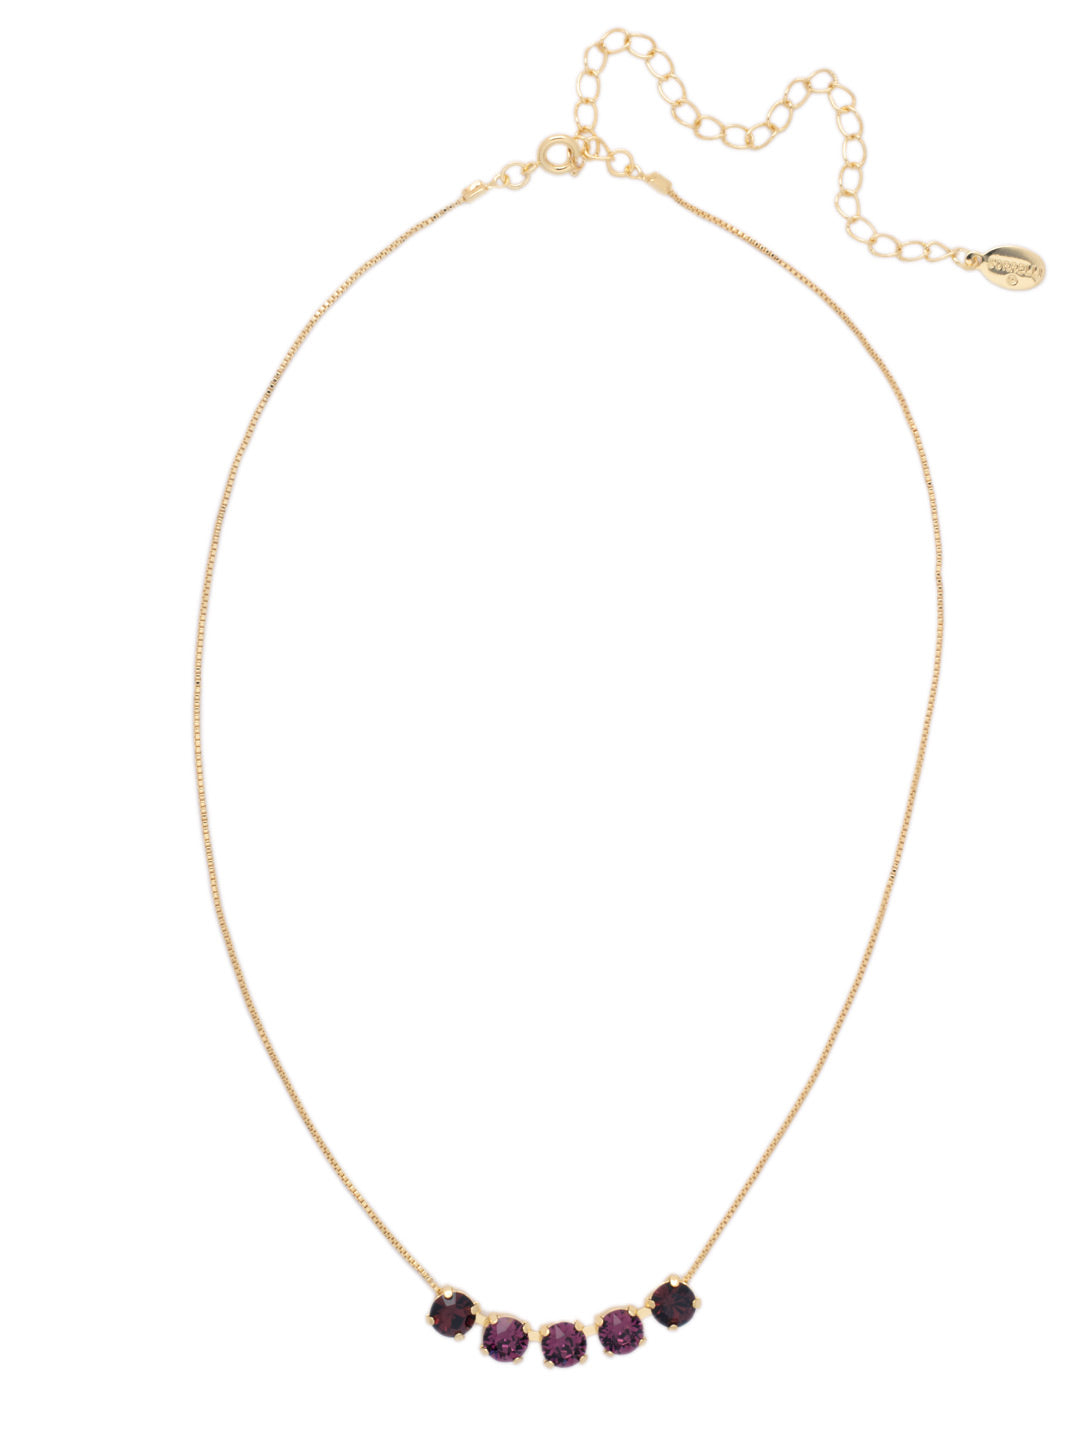 Shaughna Tennis Necklace - NFC84BGMRL - <p>The Shaughna Tennis Necklace features five crystals on a delicate adjustable chain. From Sorrelli's Merlot collection in our Bright Gold-tone finish.</p>